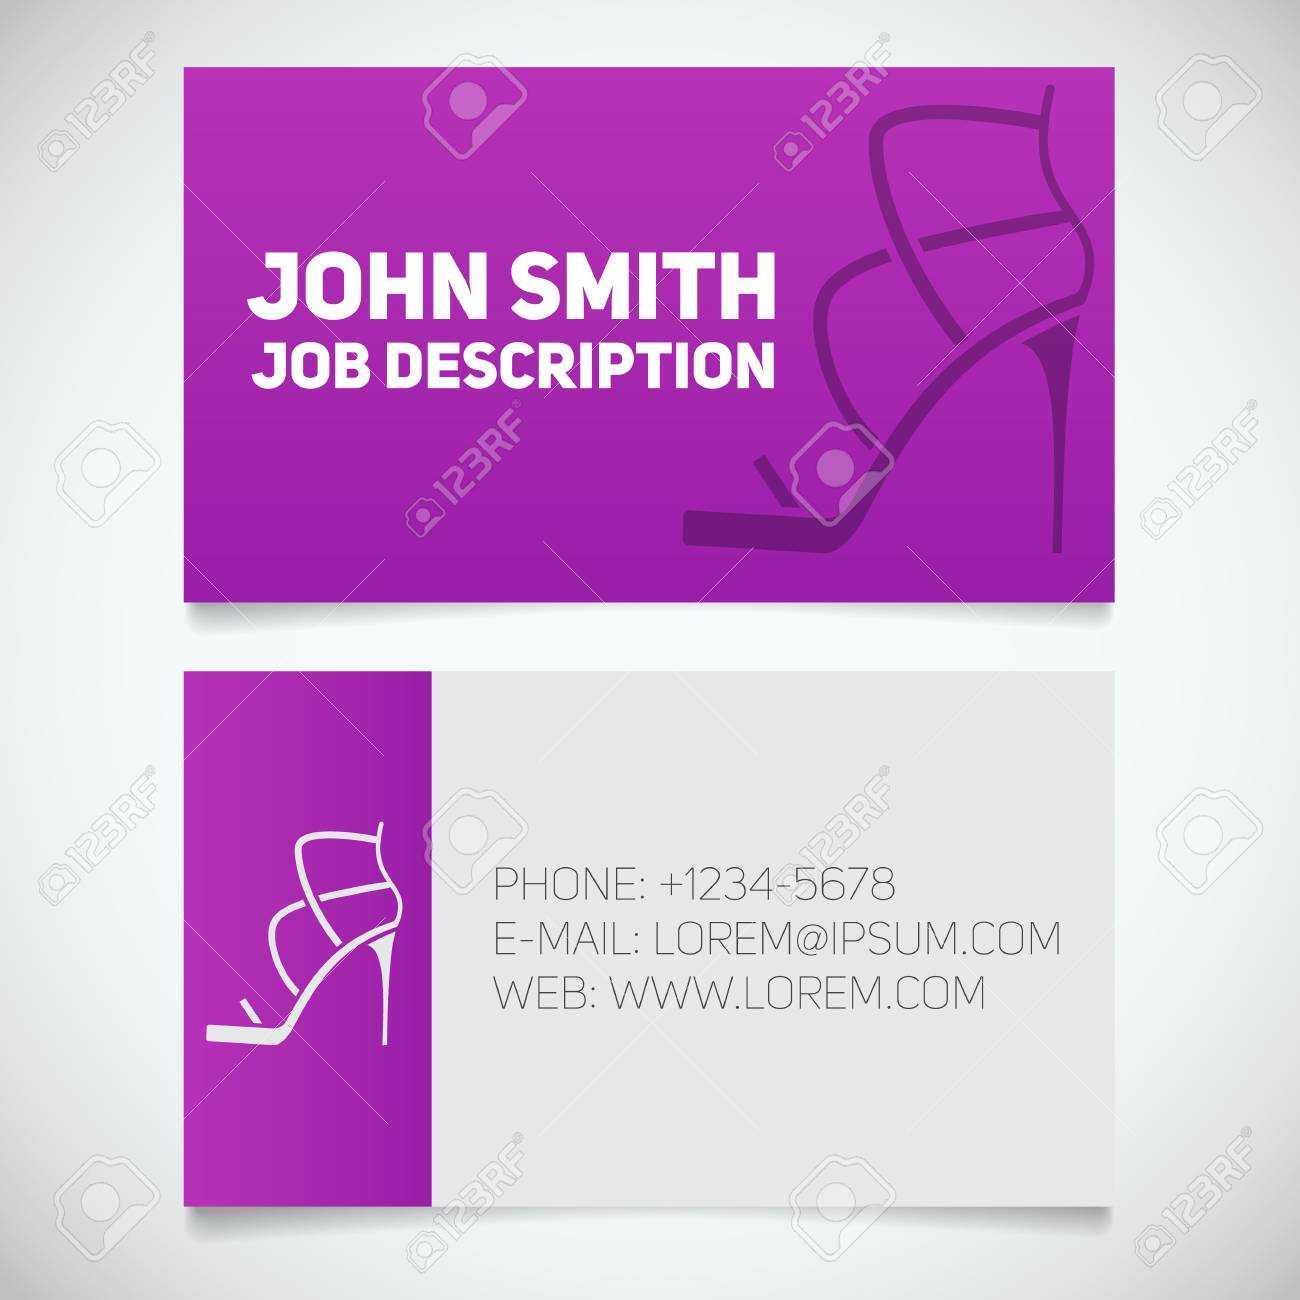 Business Card Print Template With High Heel Shoe Logo. Manager Throughout High Heel Template For Cards